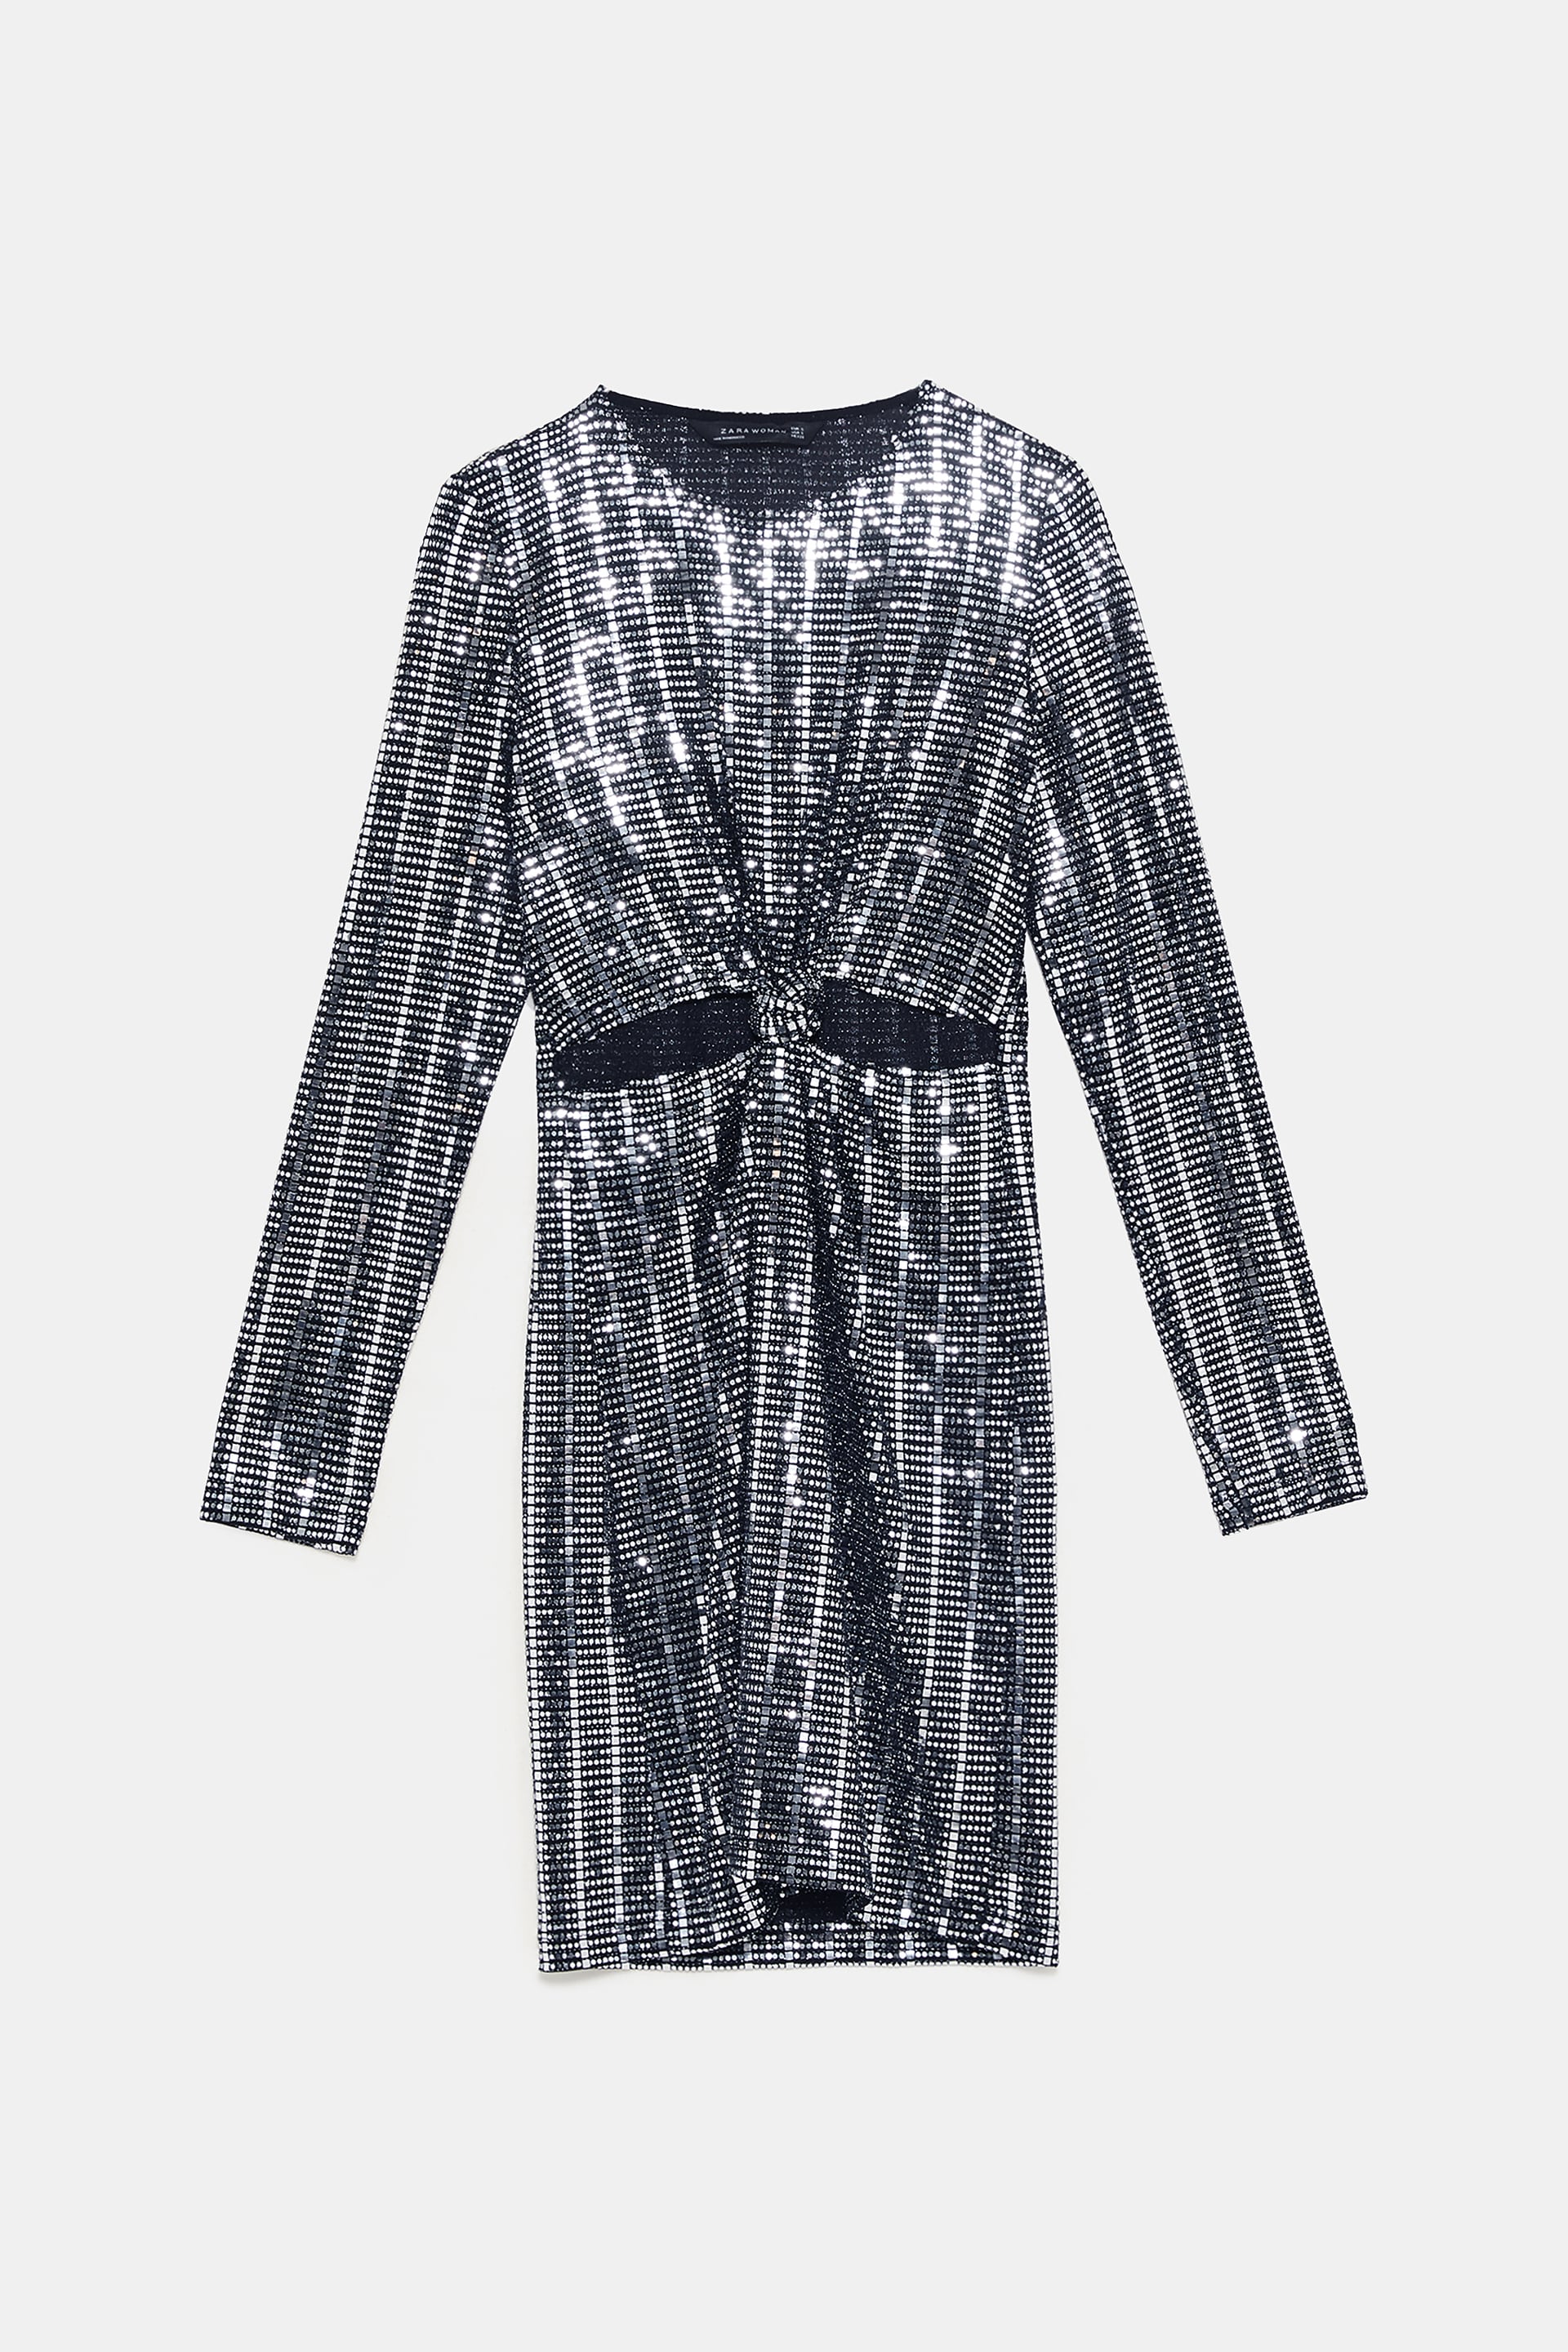 It’s Party Time, Sis! Grab-And-Go With These Last-Minute NYE Dresses Under $100